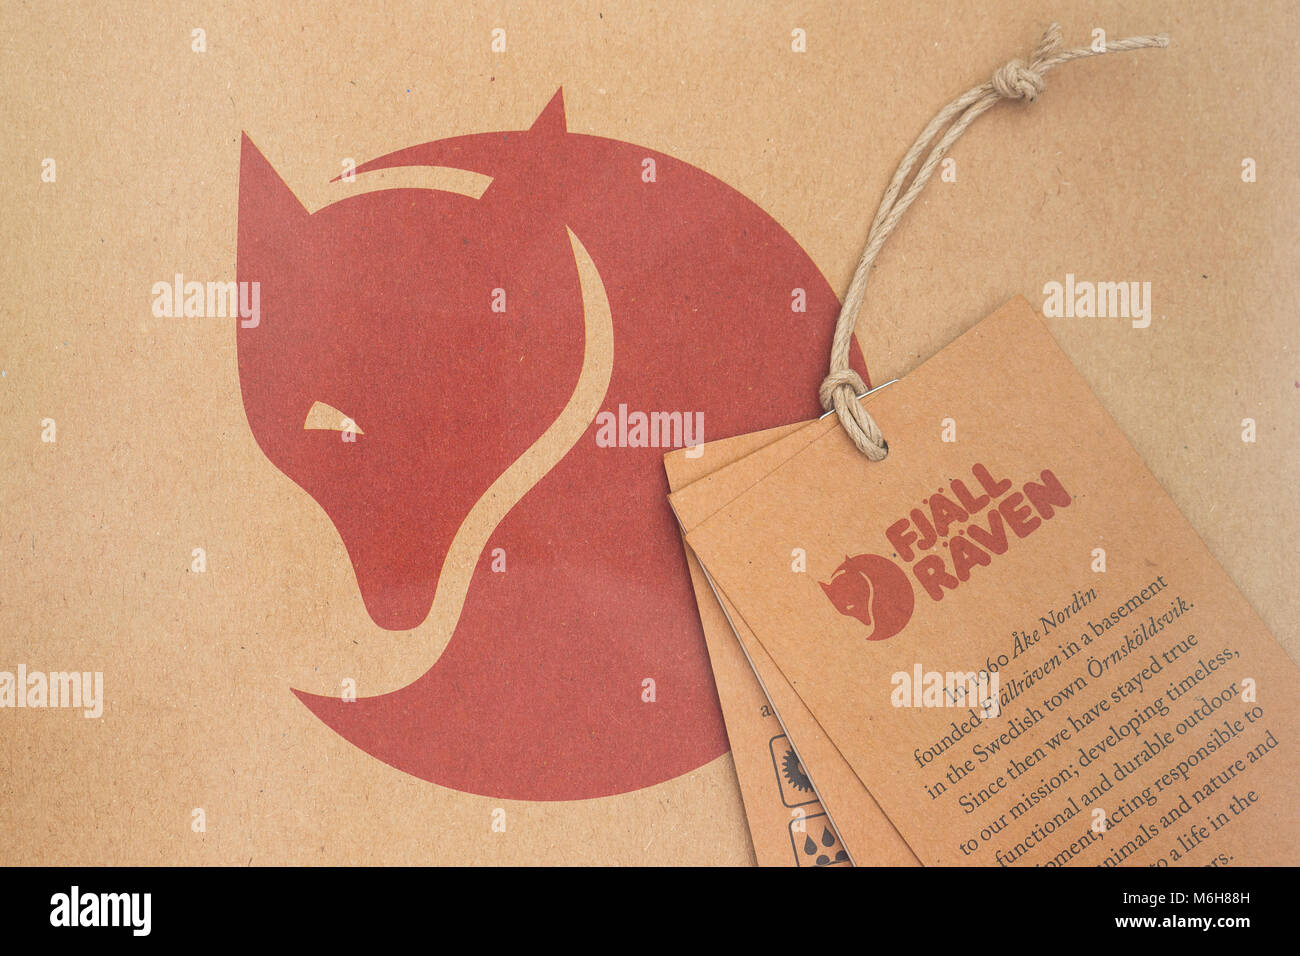 Fjallraven logo and tags, based on a stylised Arctic Fox, as used on outdoor clothing and equipment. Made in Sweden. Stock Photo